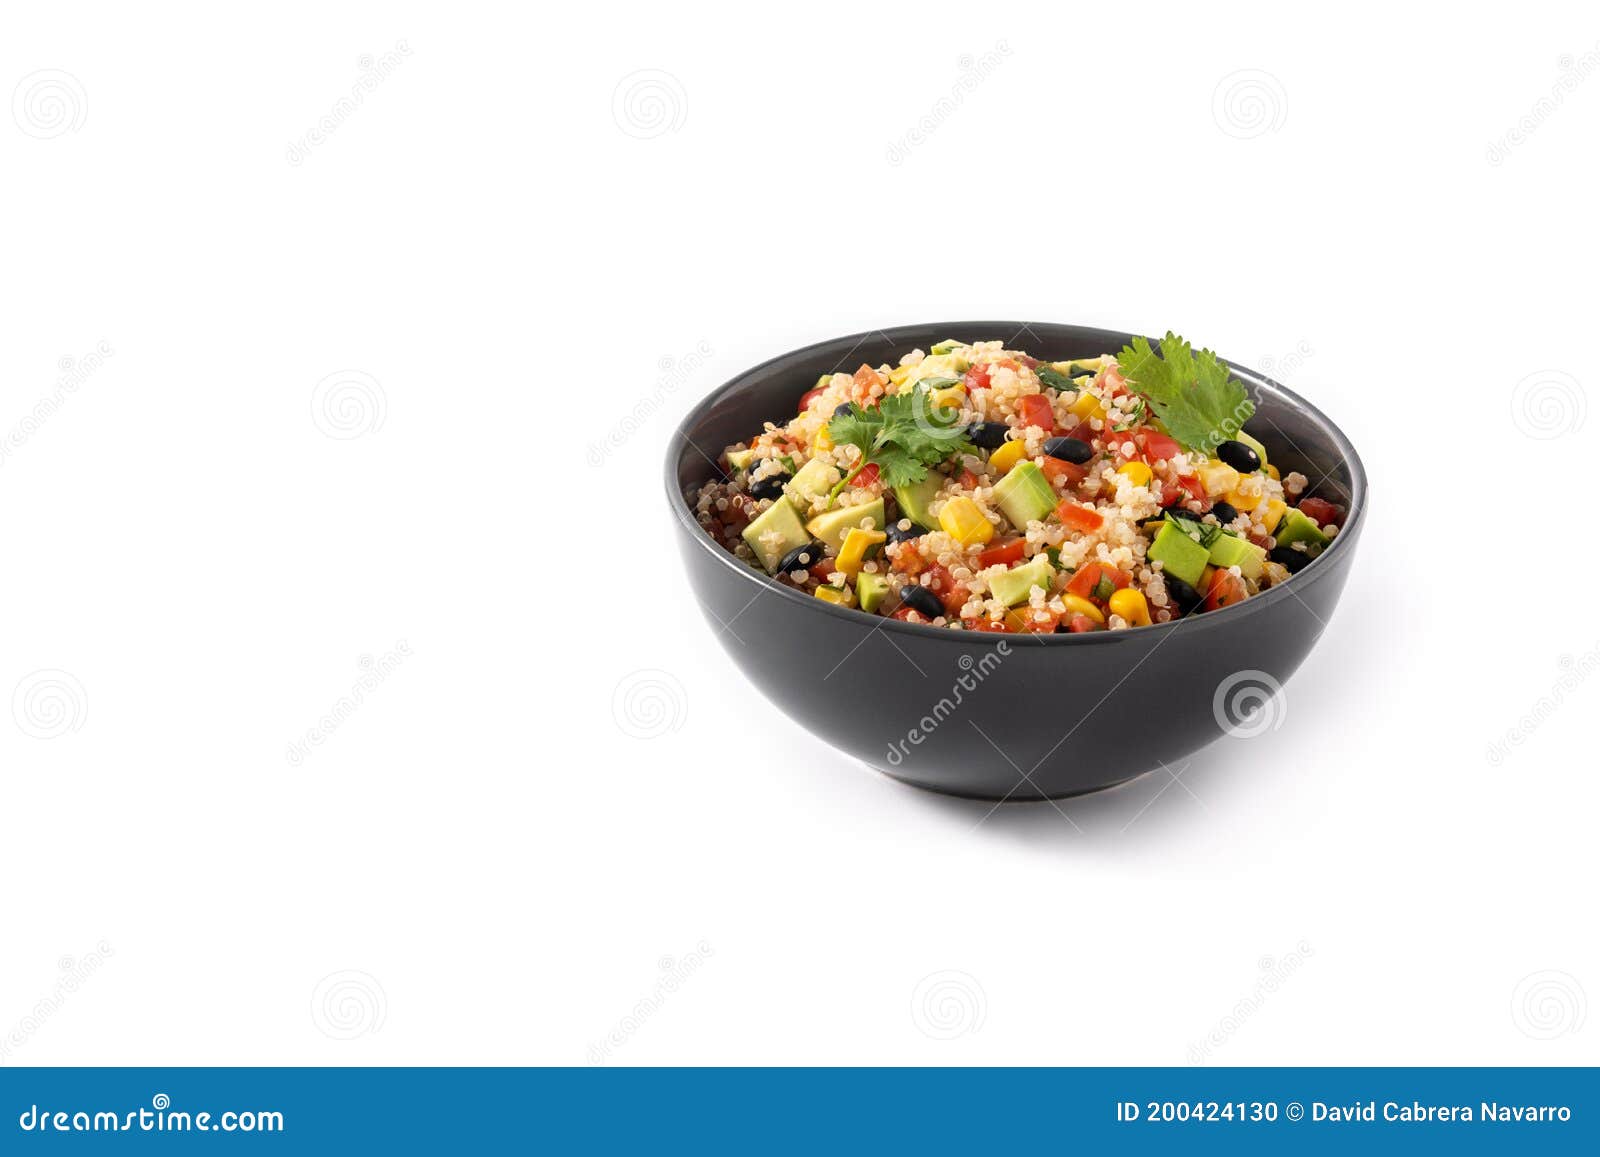 mexican salad with quinua in bowl